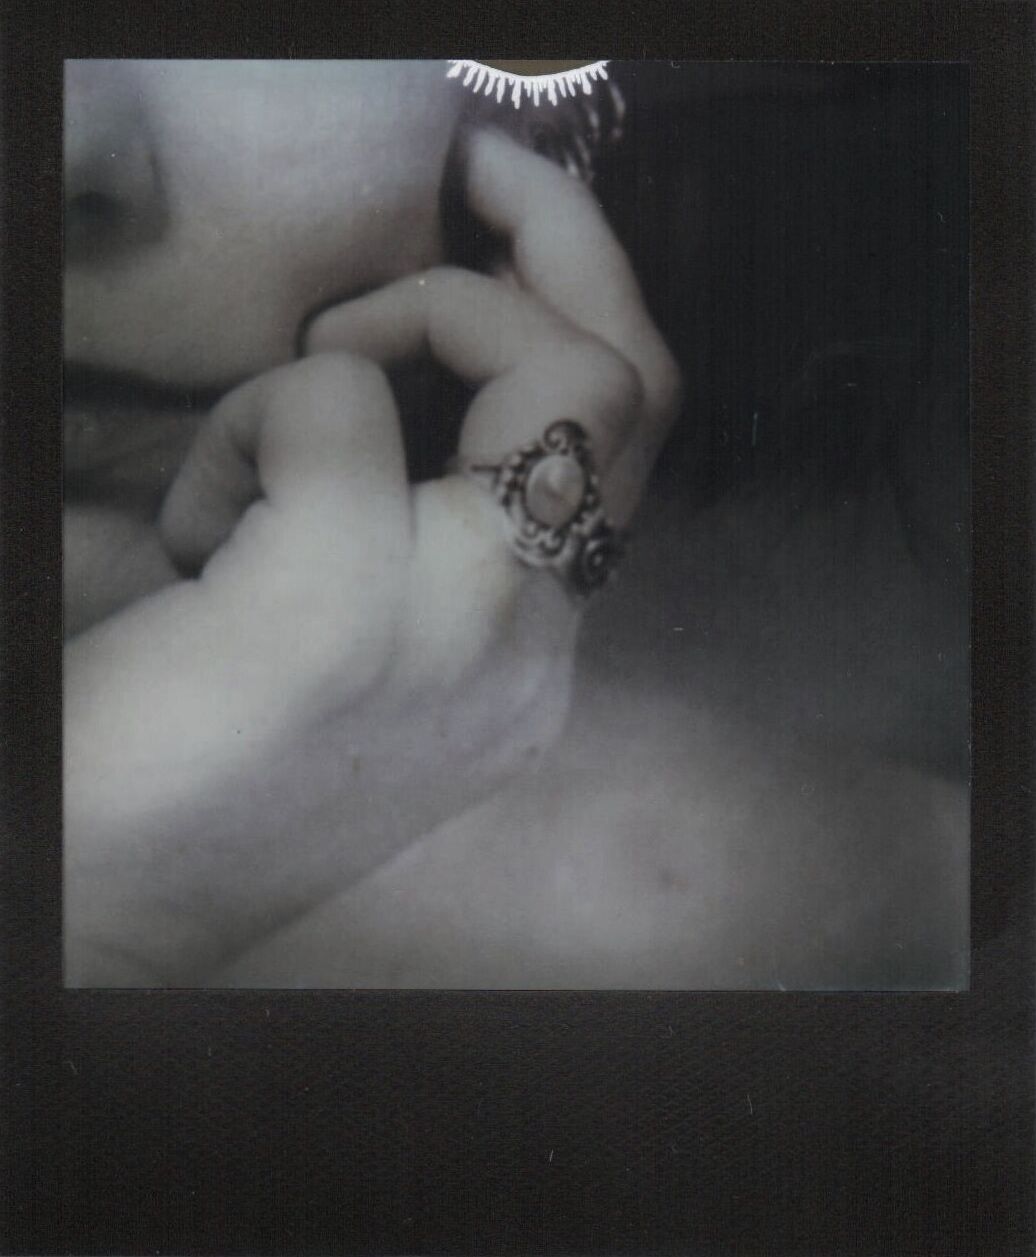 The Ring | SLR 680 | Expired black and white Impossible 600 film | Daniela Grünwald